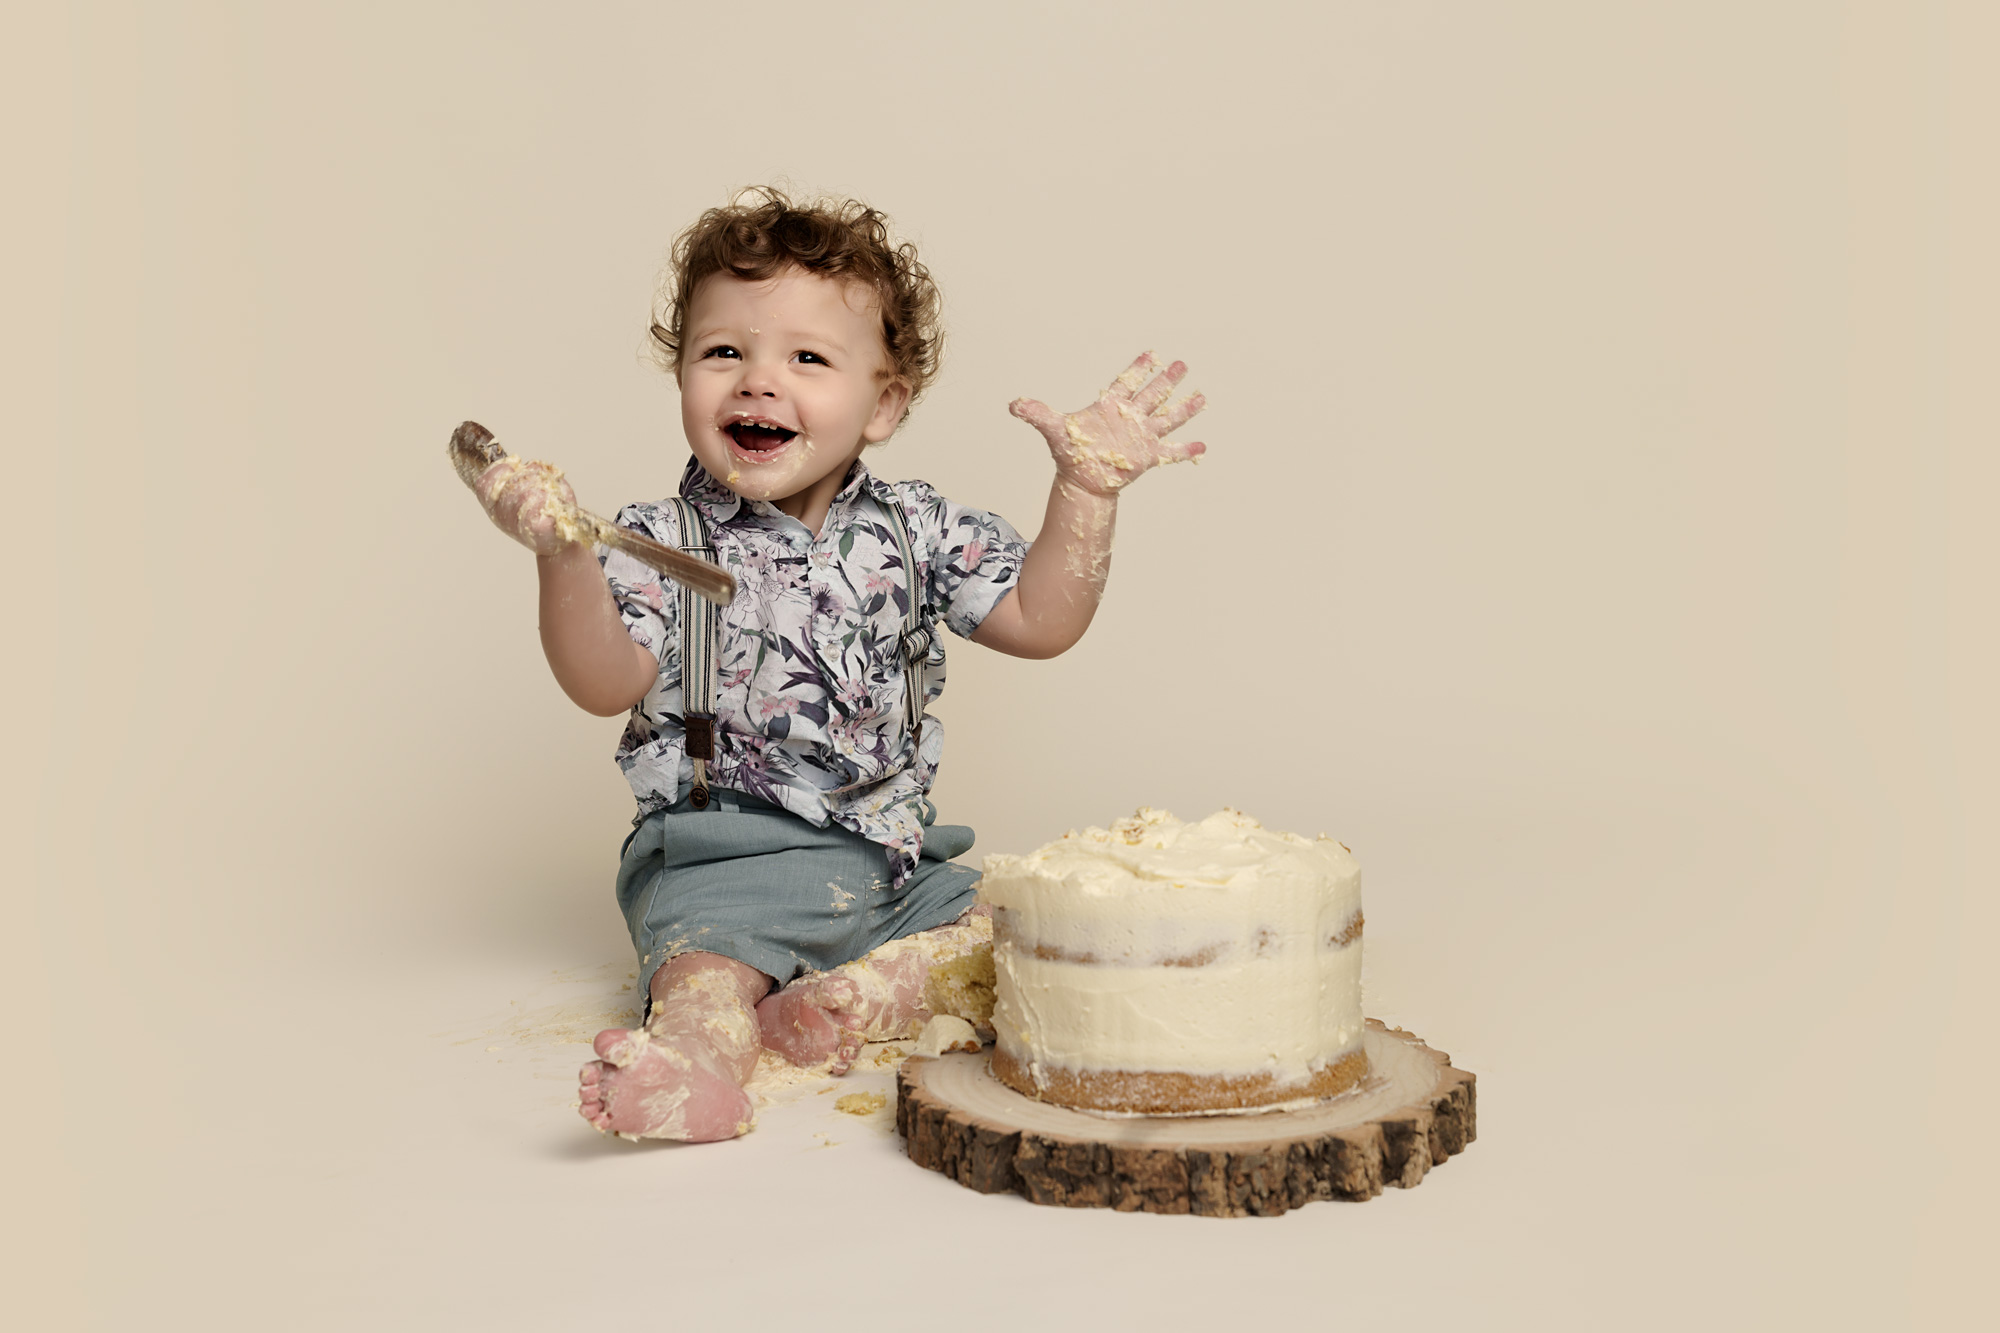 One year old boy sitting gin front of a cream coloured cake, holding a wooden spoon, with icing on his hands and feet, smiling at the camera.